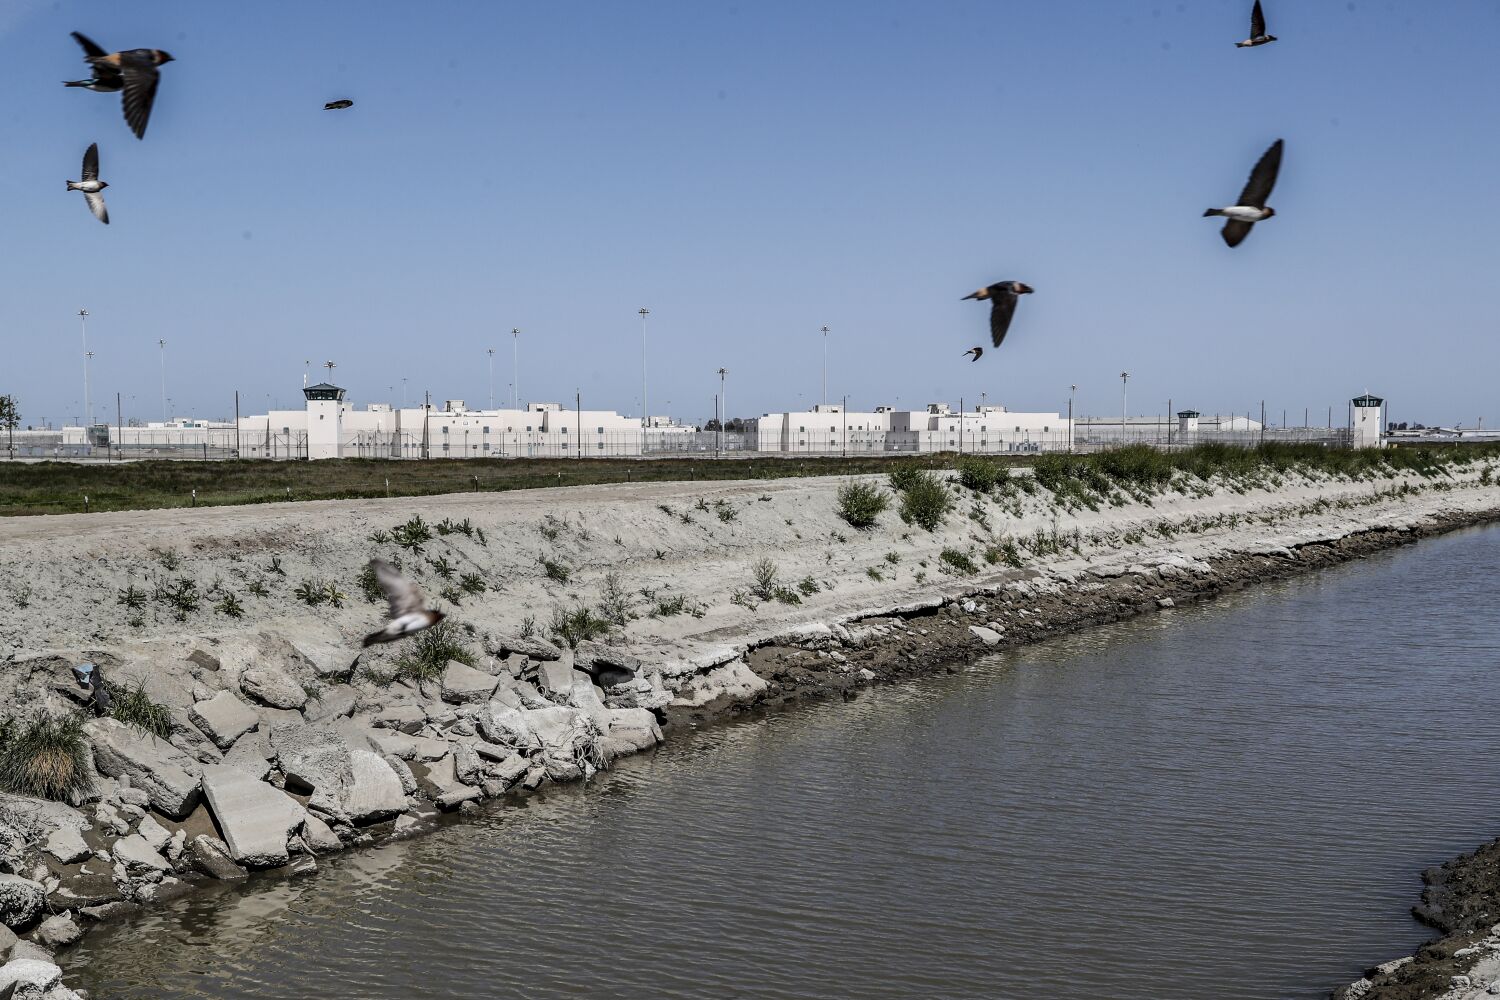 State will pay to raise levee protecting Corcoran city and prison complex from flooding